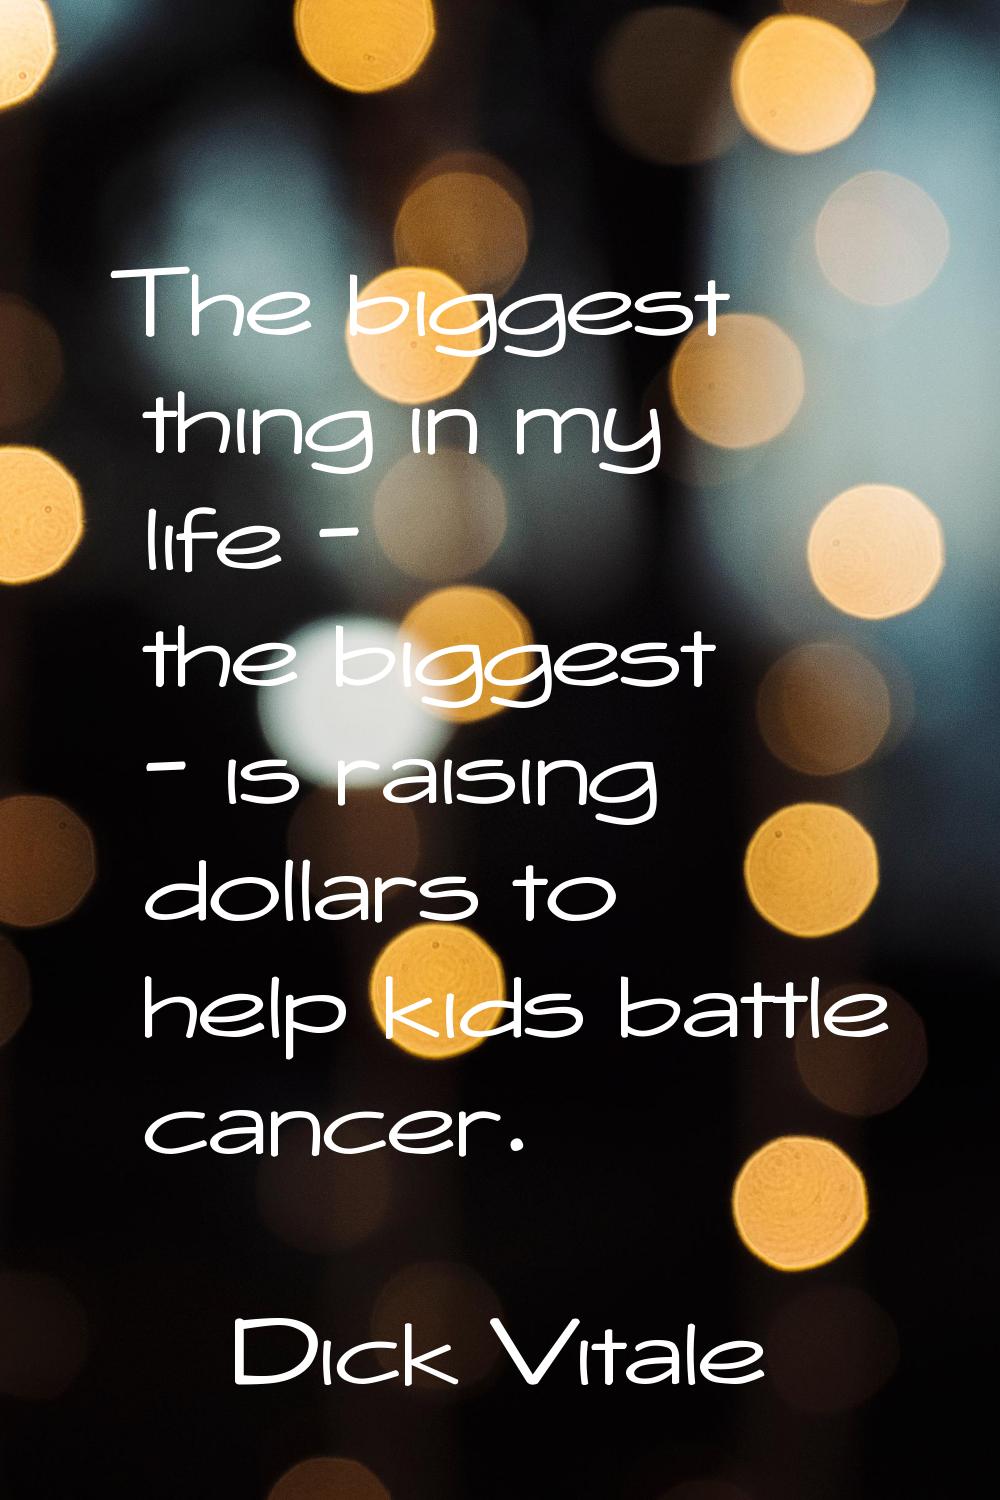 The biggest thing in my life - the biggest - is raising dollars to help kids battle cancer.